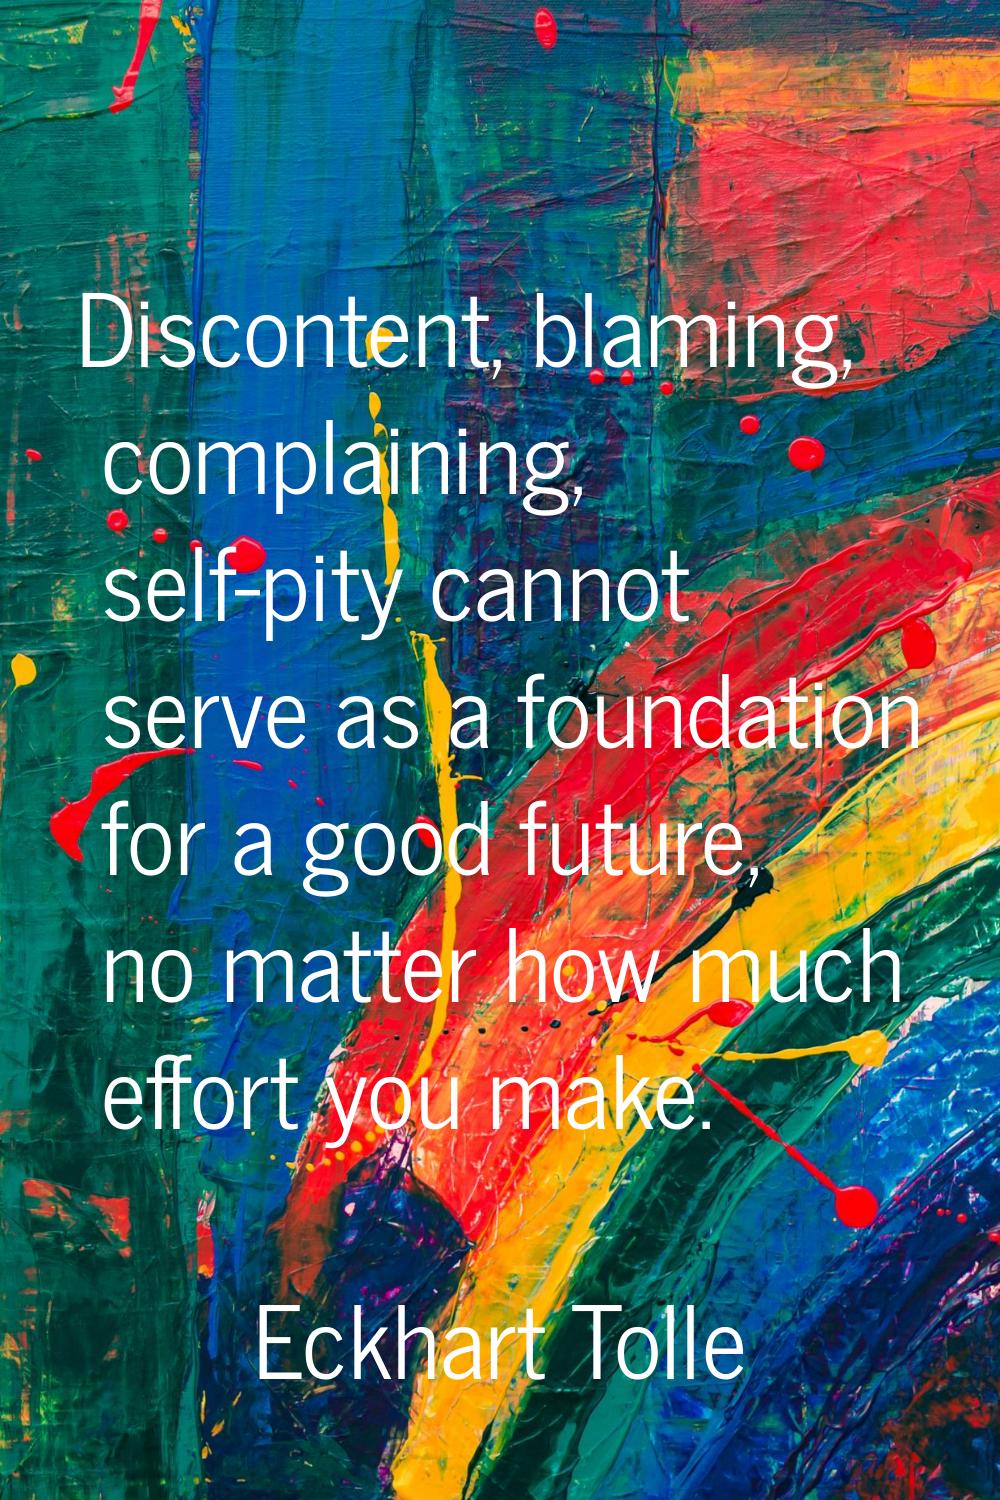 Discontent, blaming, complaining, self-pity cannot serve as a foundation for a good future, no matt